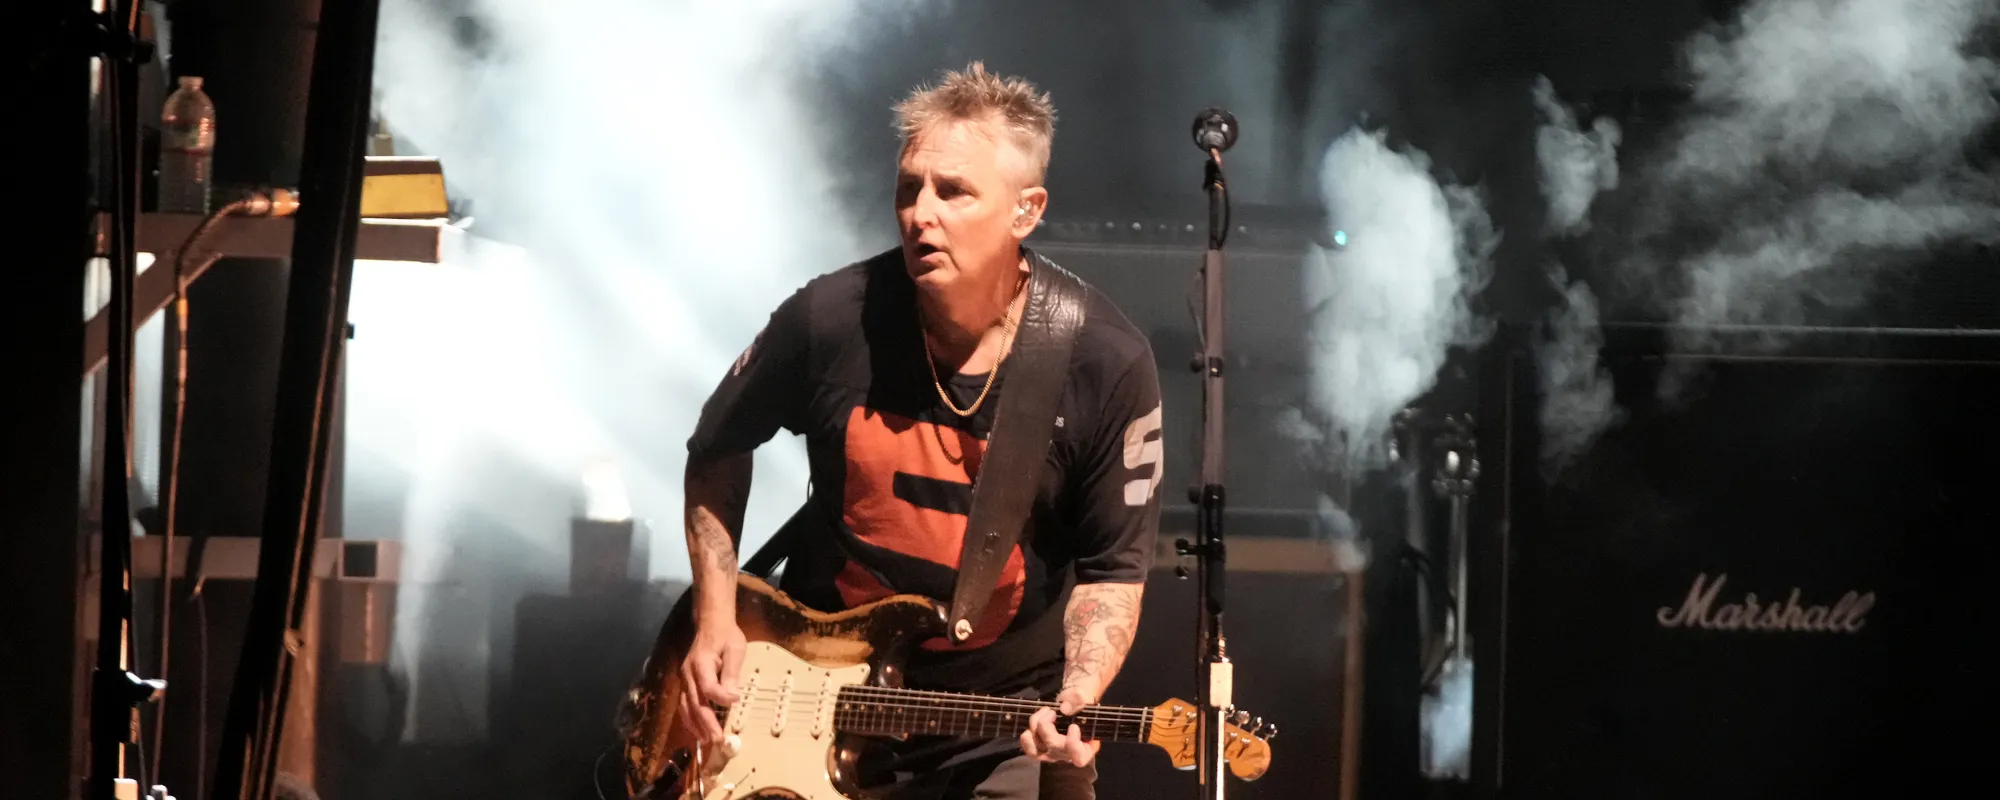 Pearl Jam’s Mike McCready Protests in the Bay Area for Abortion Rights